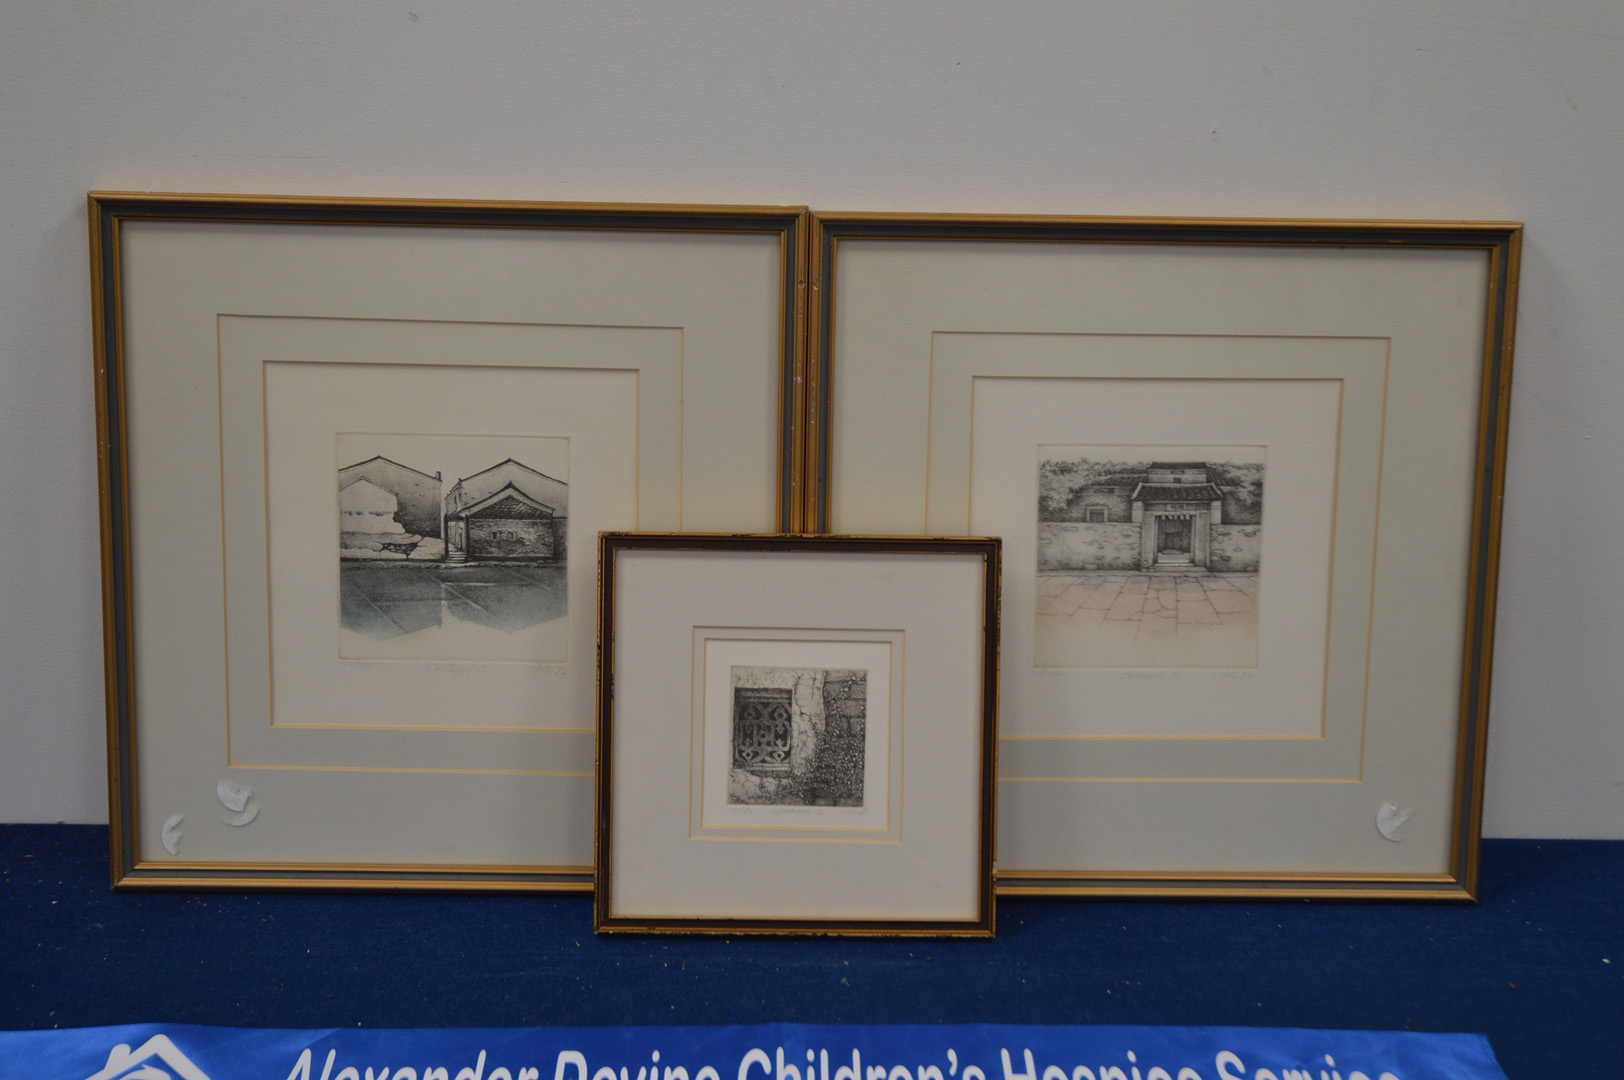 Three limited edition prints of buildings, two of cottages, the other a window, the largest pair